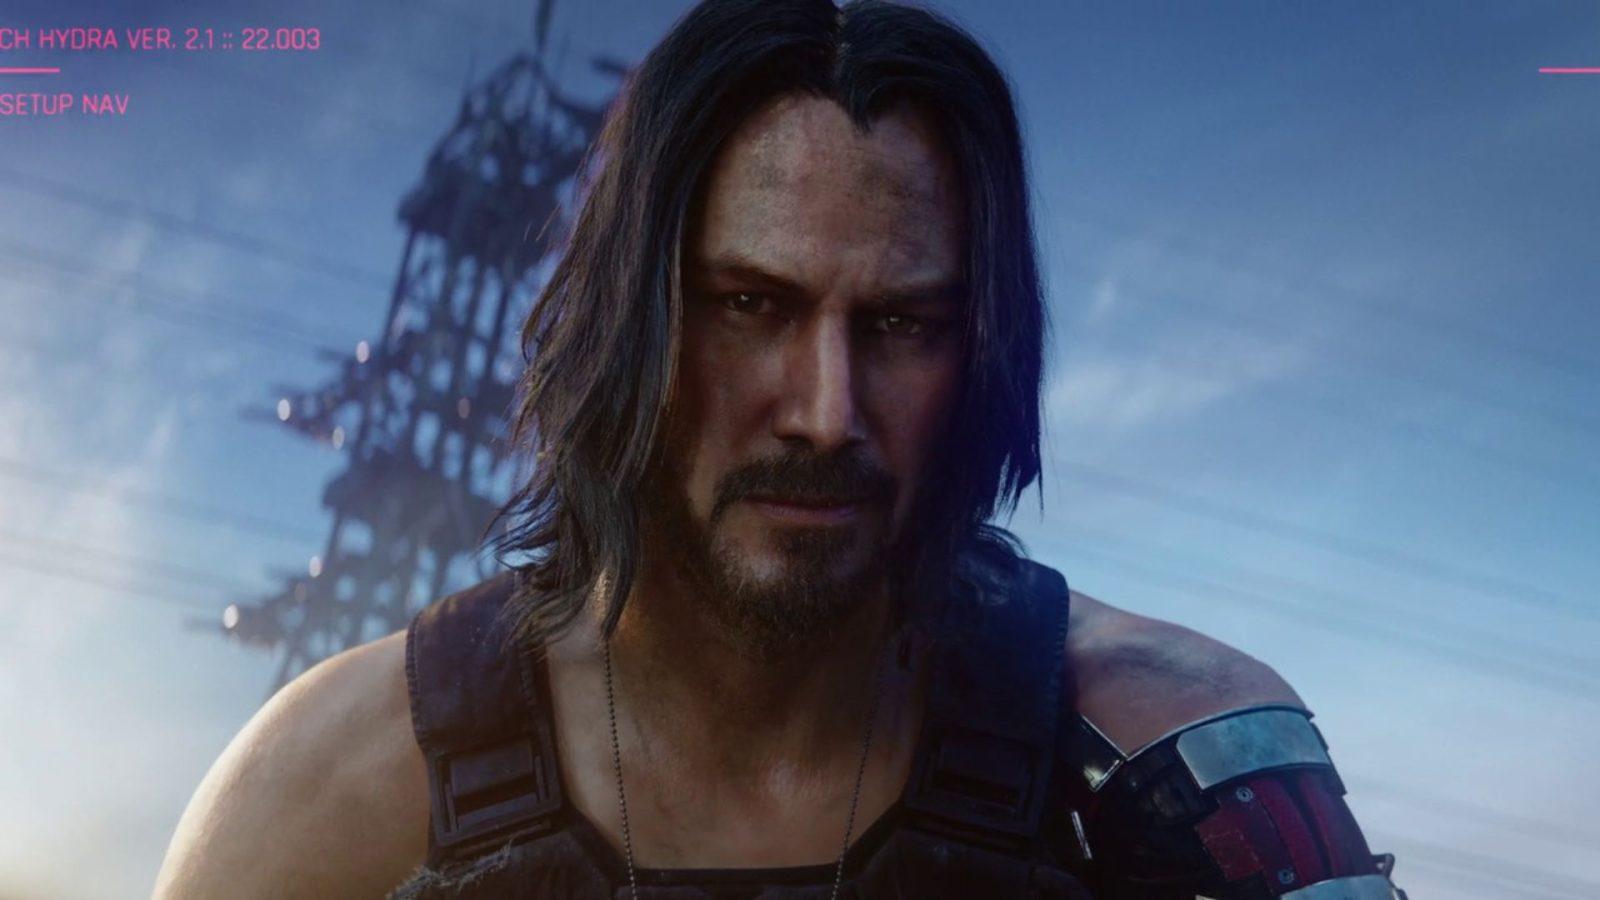 cyberpunk 2077 trailed featuring keanu reeves' johnny silverhand